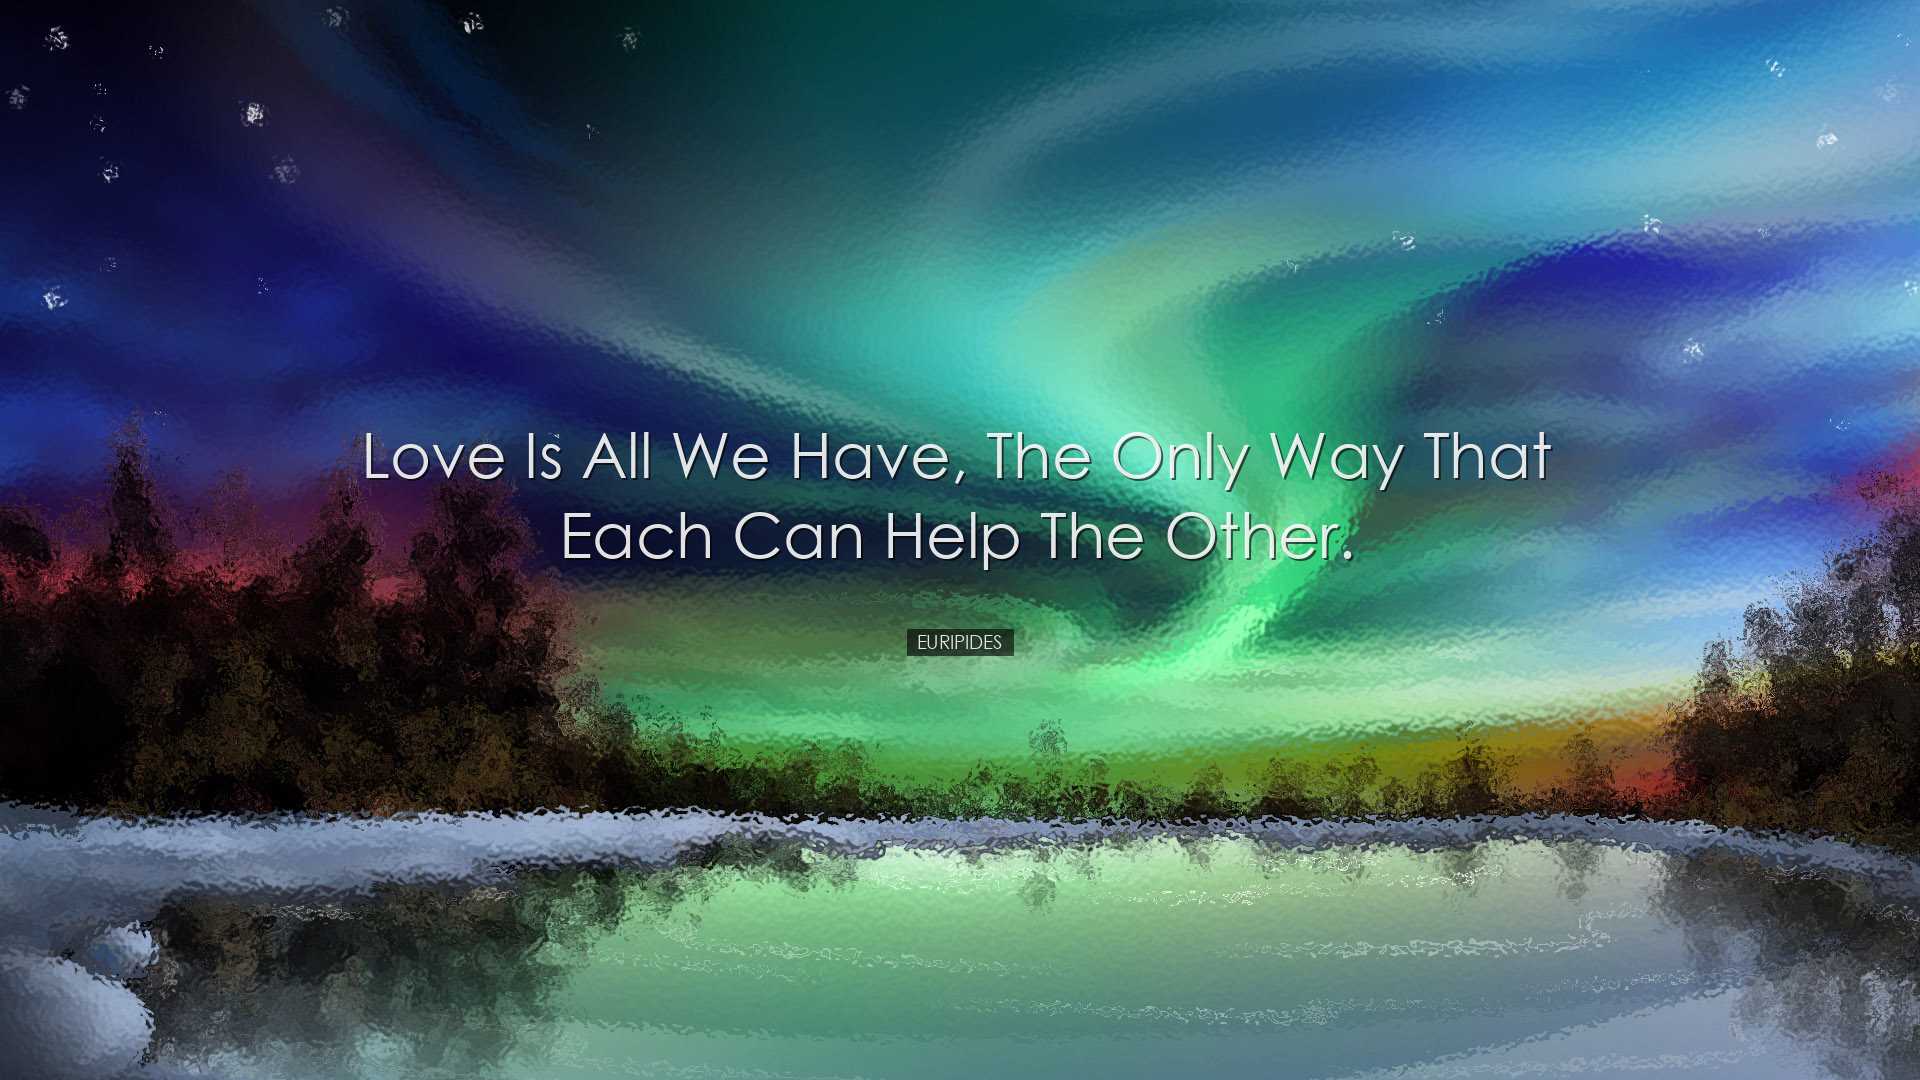 Love is all we have, the only way that each can help the other. -